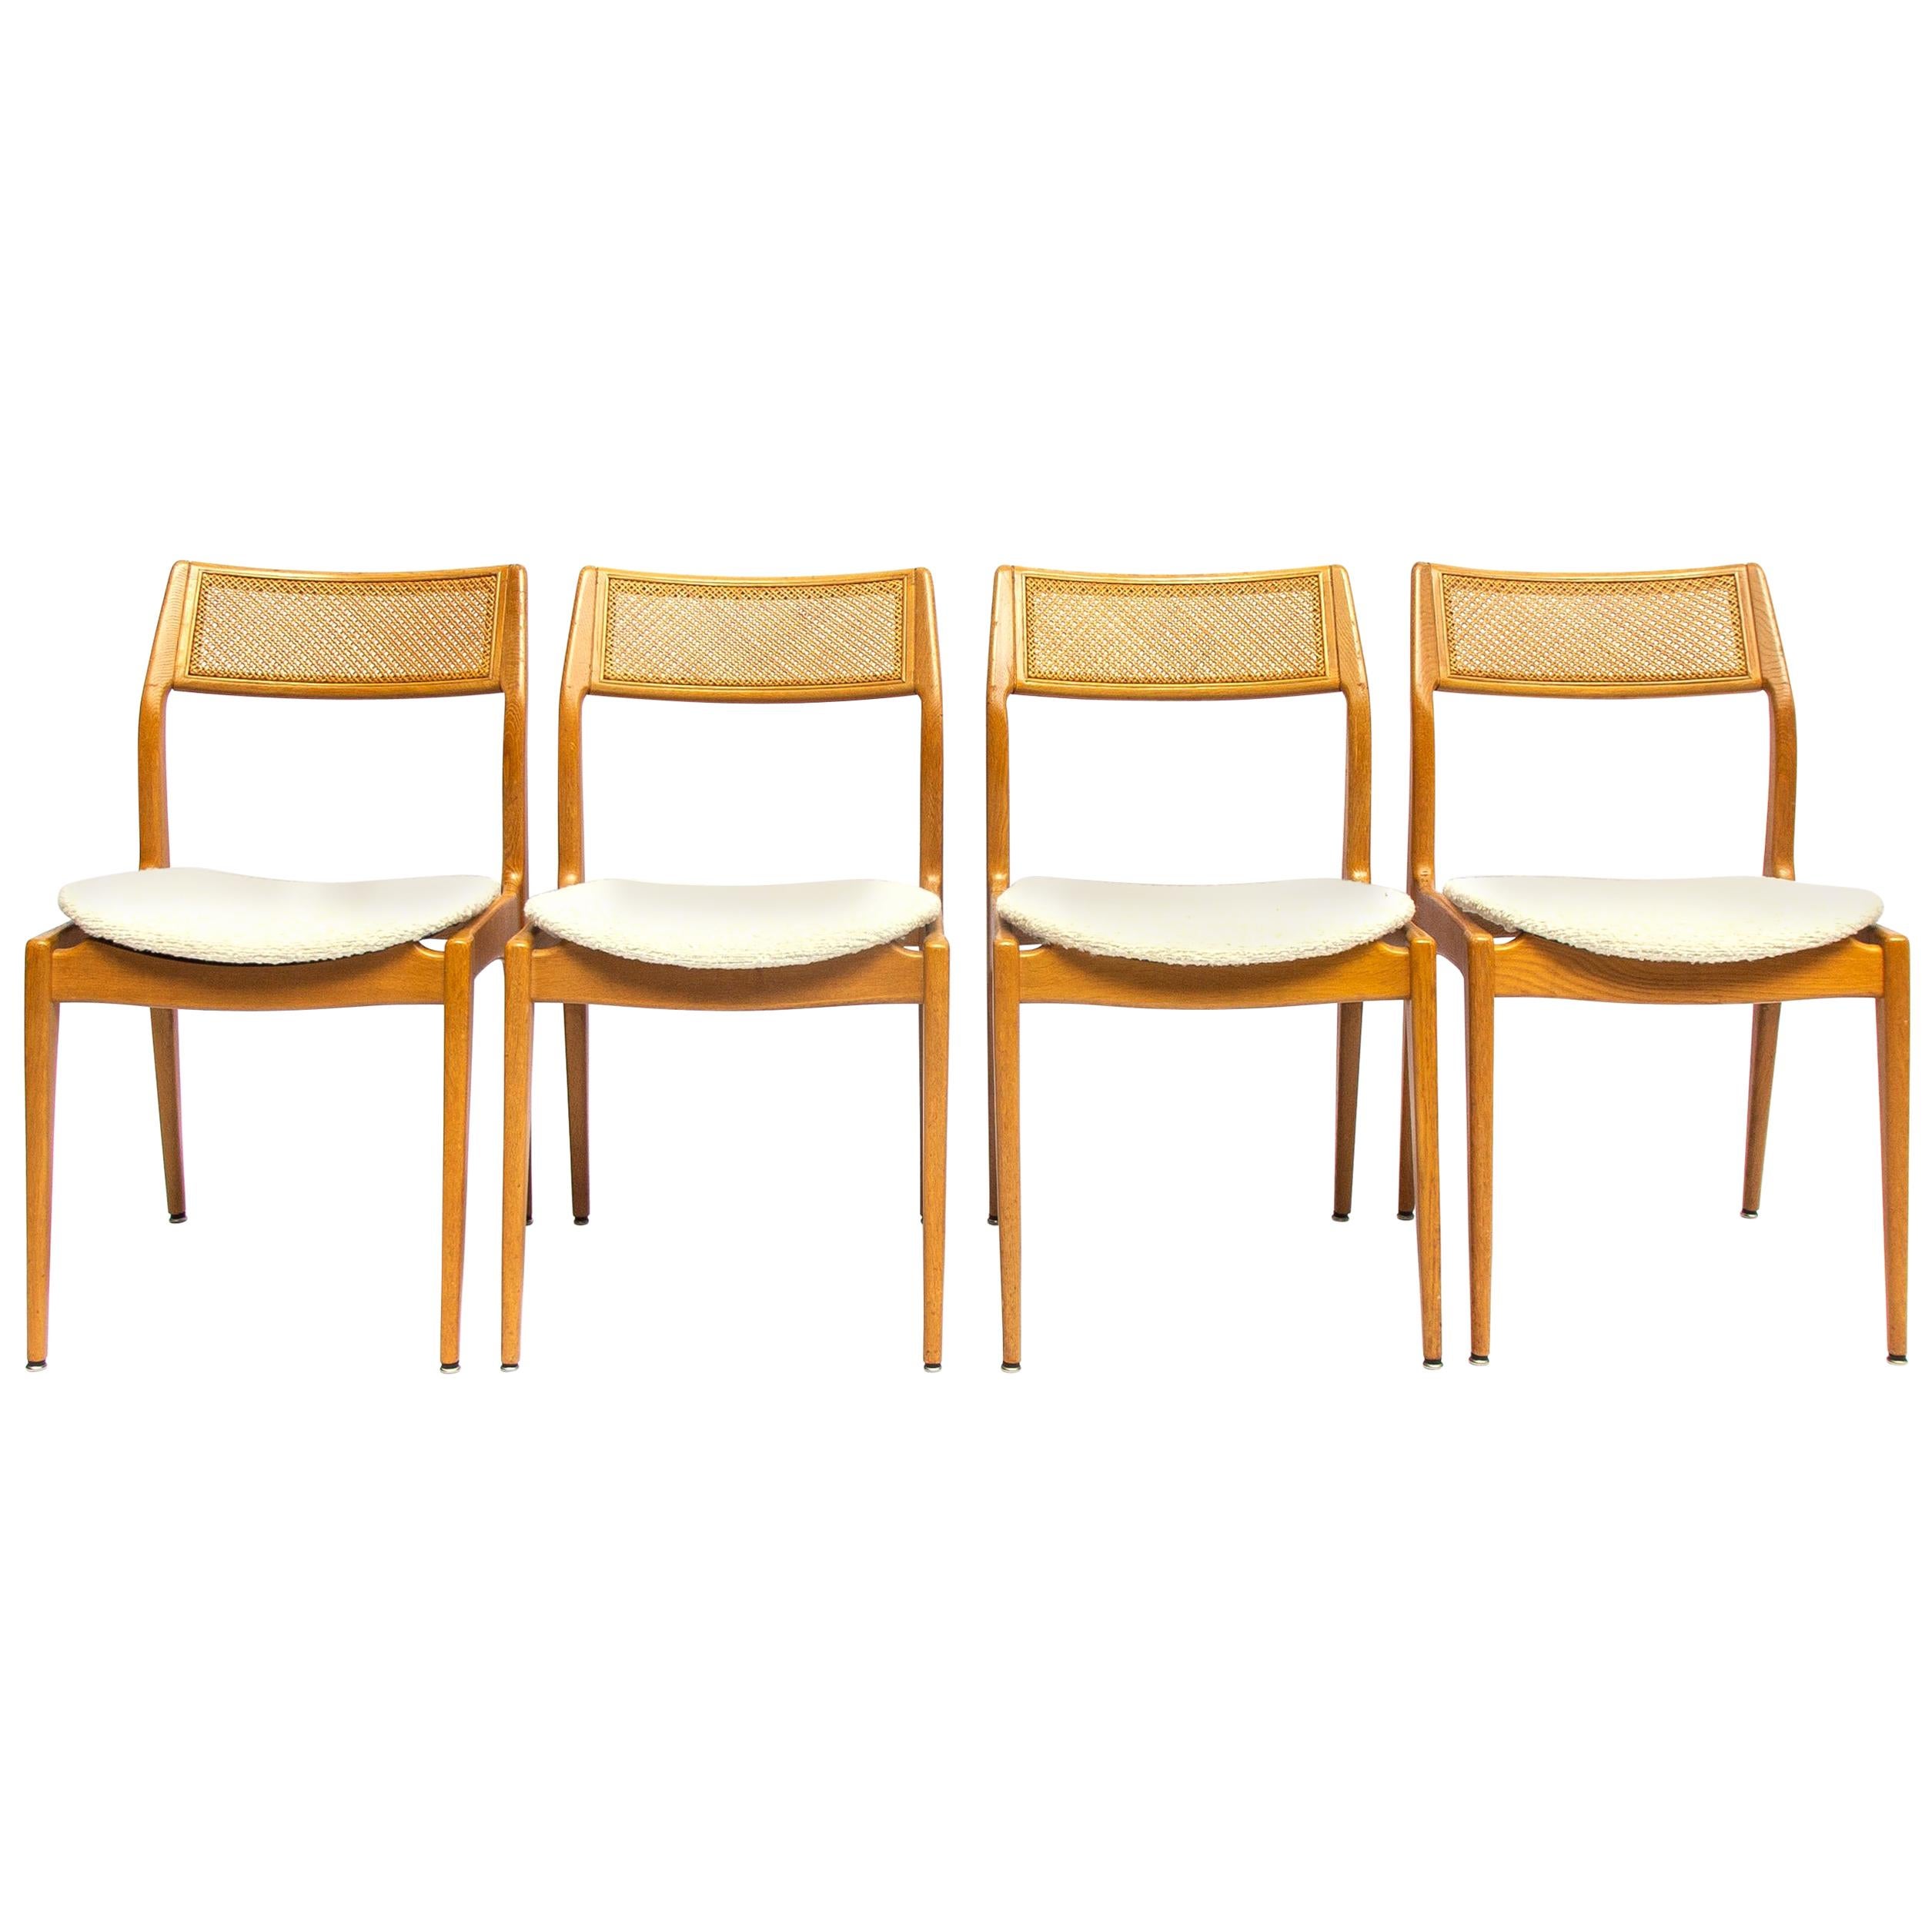 Set of Four Danish Midcentury Oak Dining Chairs, 1950s